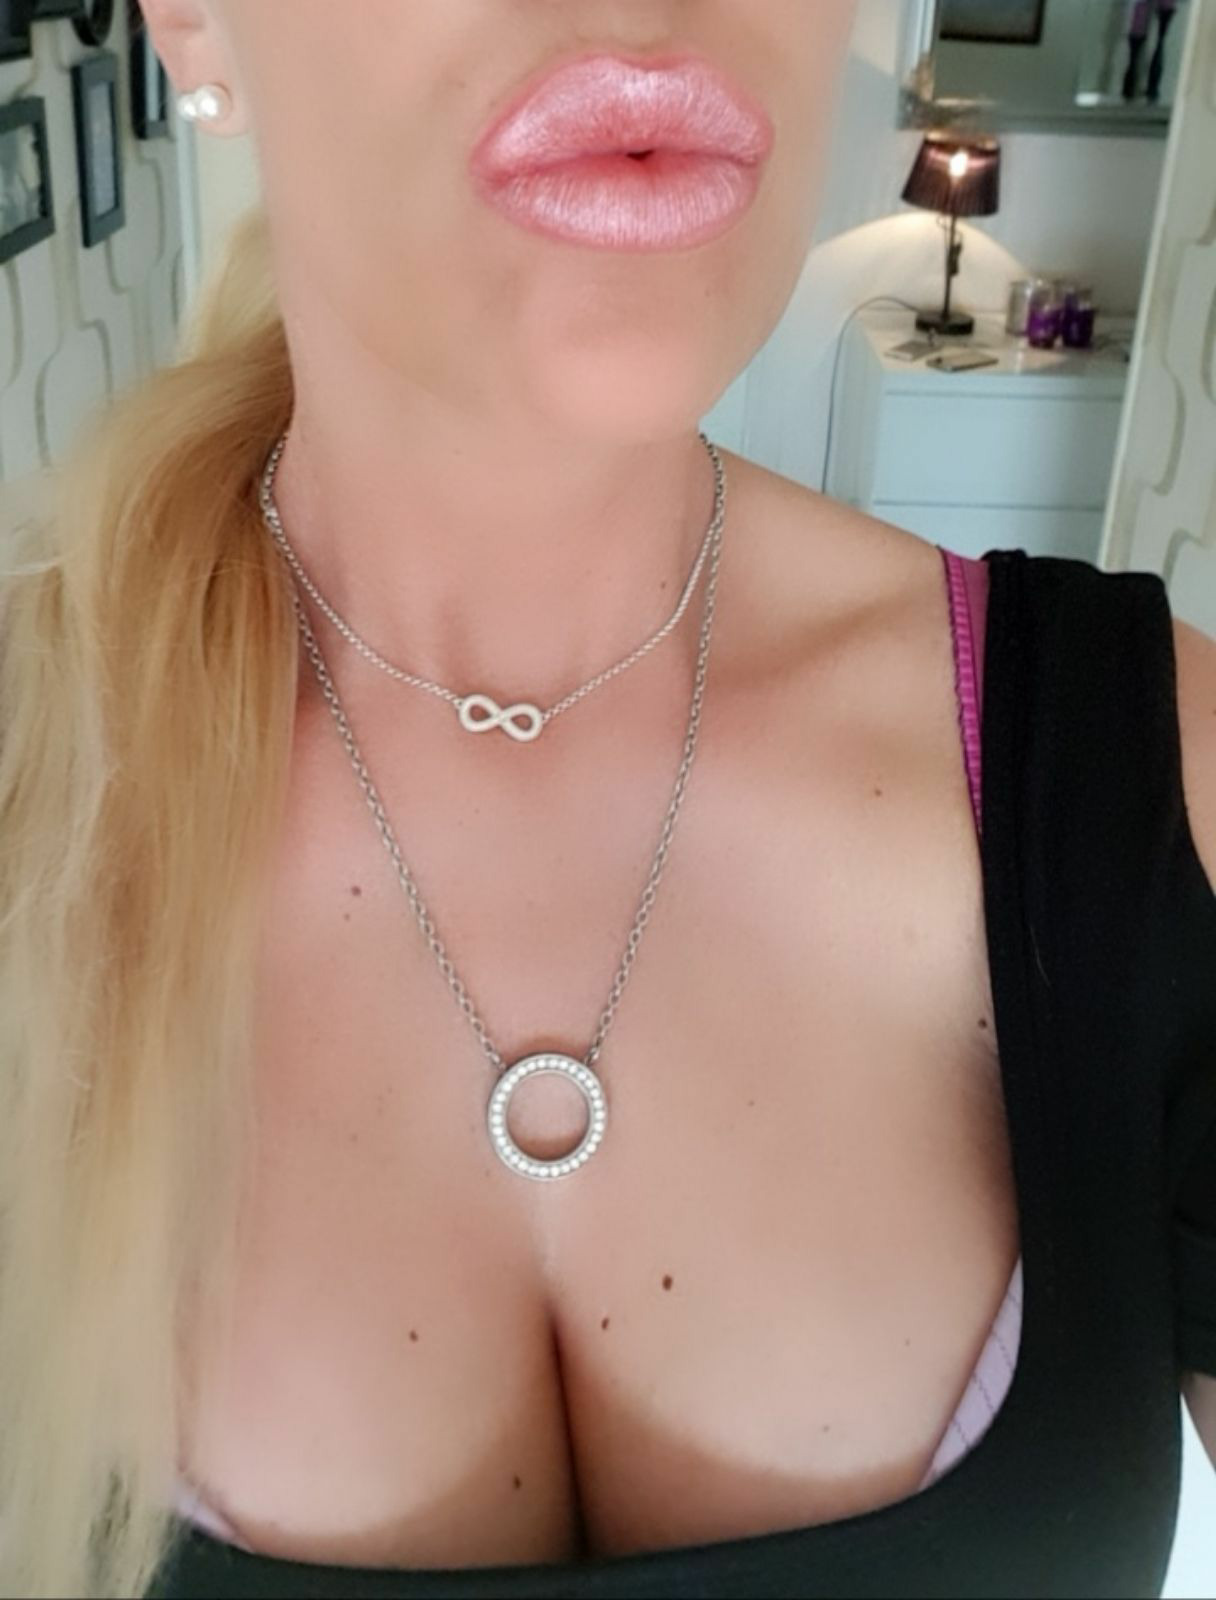 mmpiercing:  Sexy wife here. Just want to wish you a happy horny saturday 😘 Do